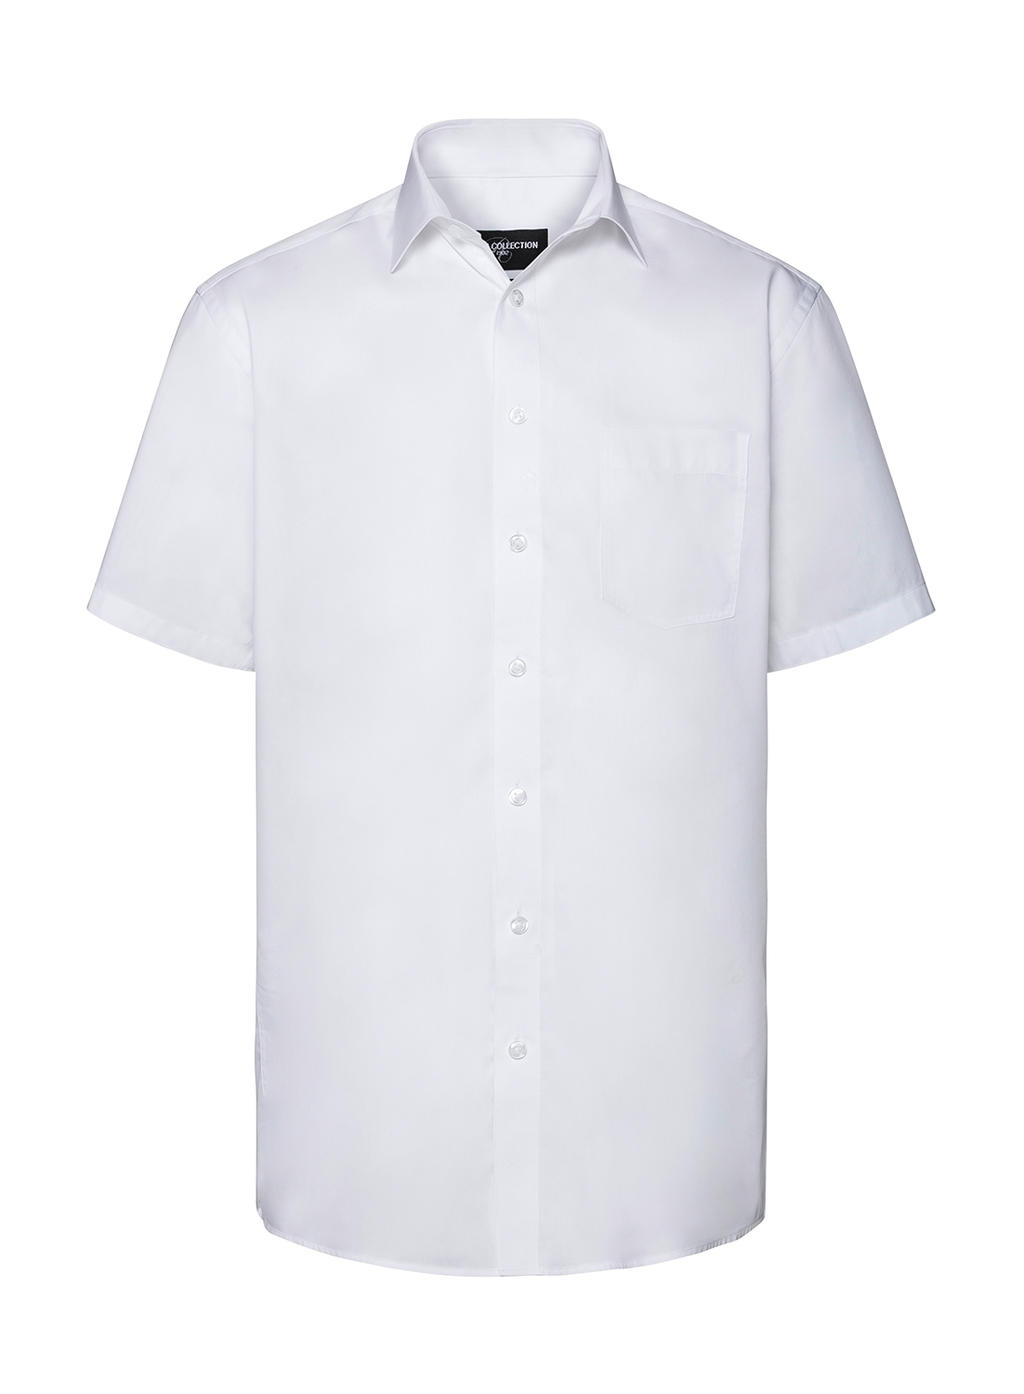  Mens Tailored Coolmax? Shirt in Farbe White